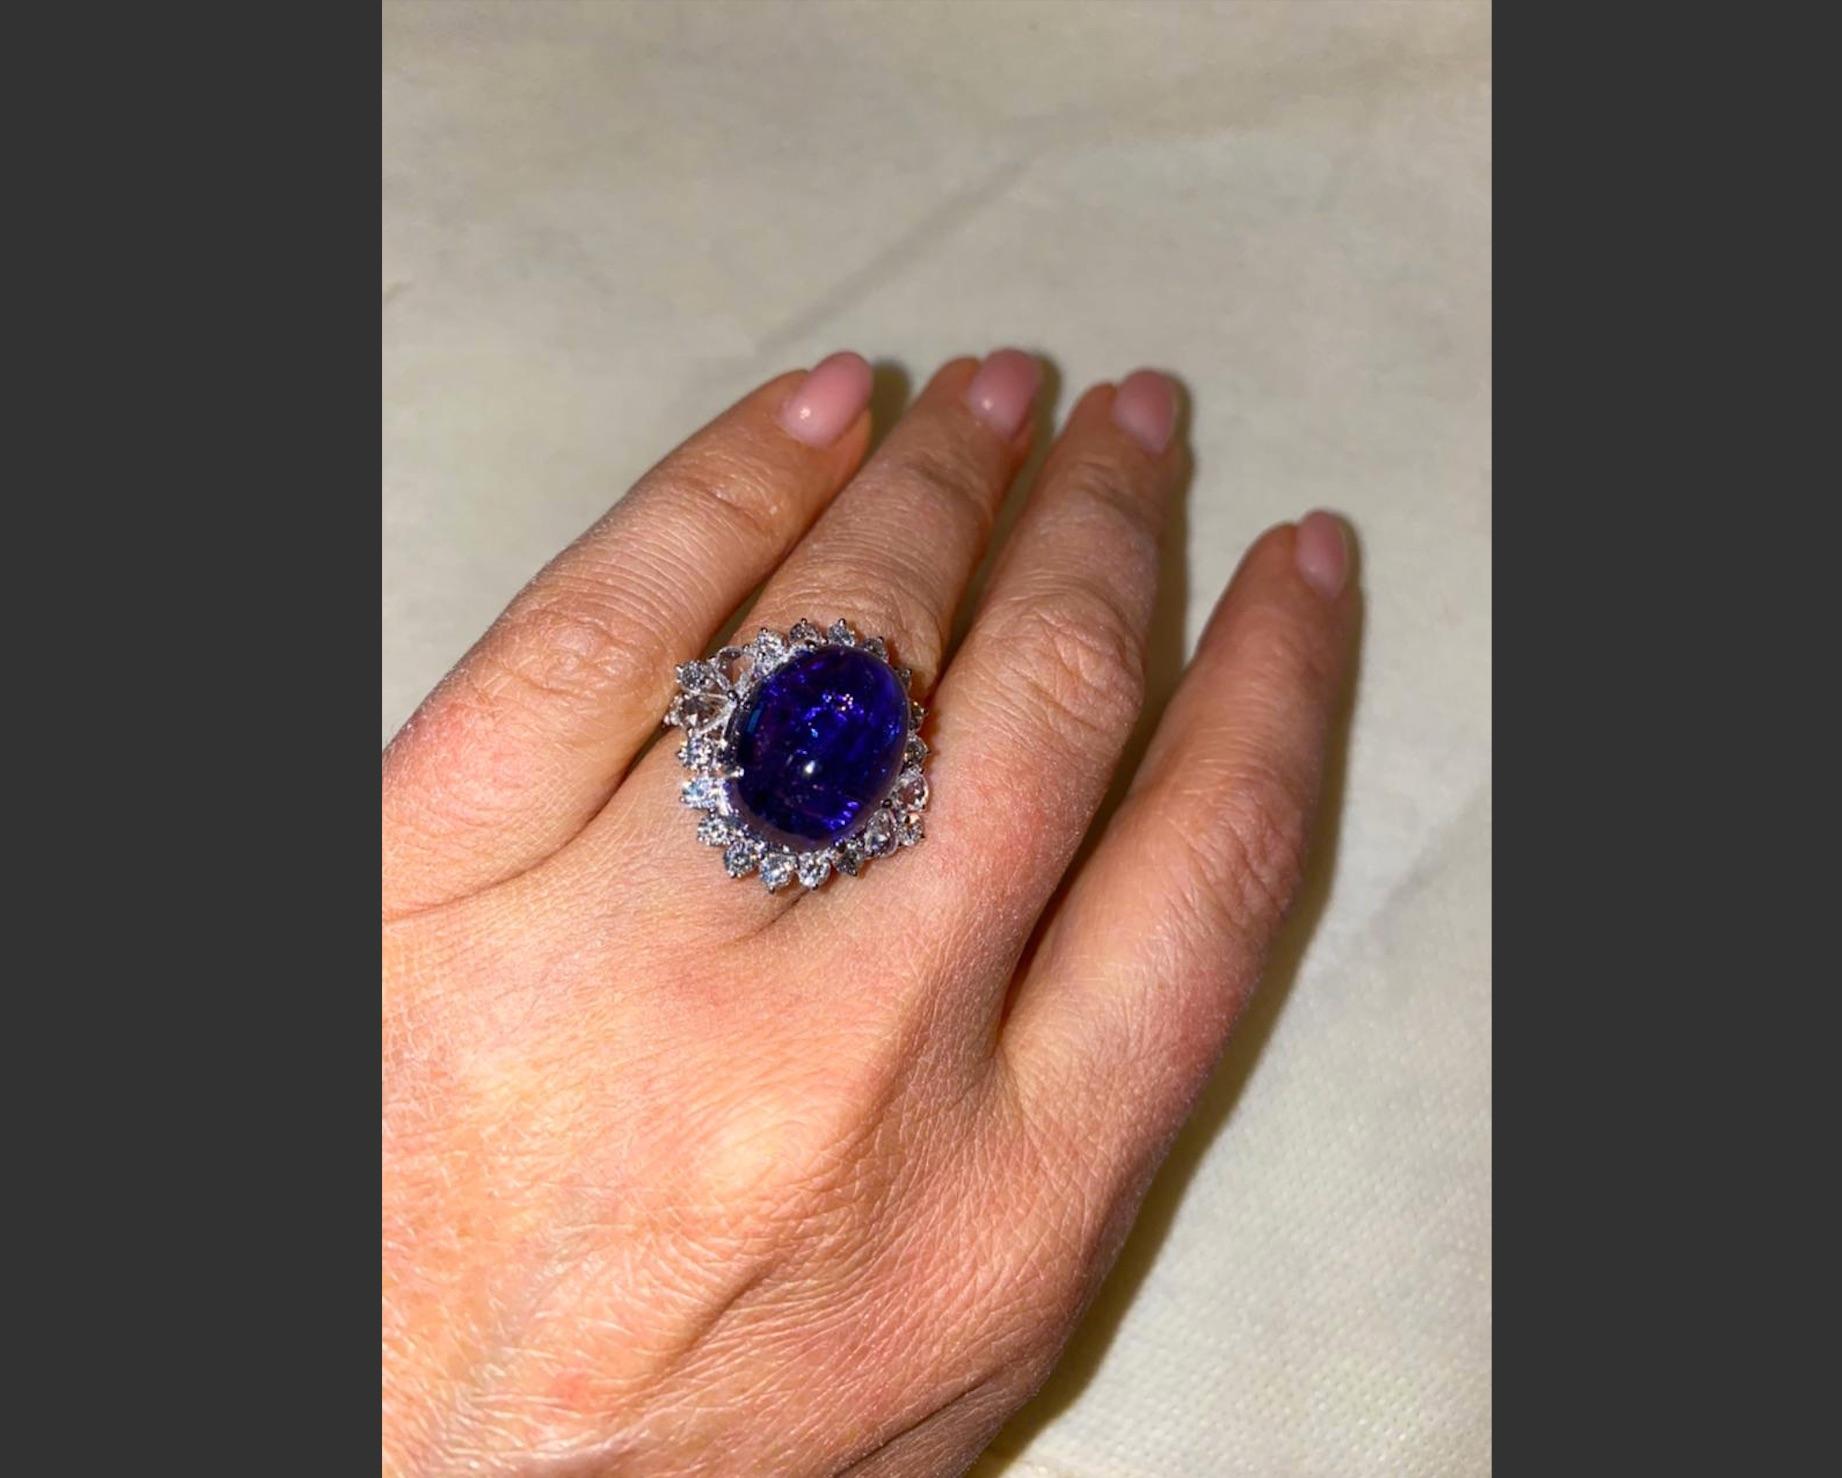 A gorgeous Tanzanite and Diamond cocktail ring, with a lustrous 15.86 carat Tanzanite centre stone and 1.32 carat colorless Diamonds. The stones are set in 3.28 grams solid 18K Gold. 
